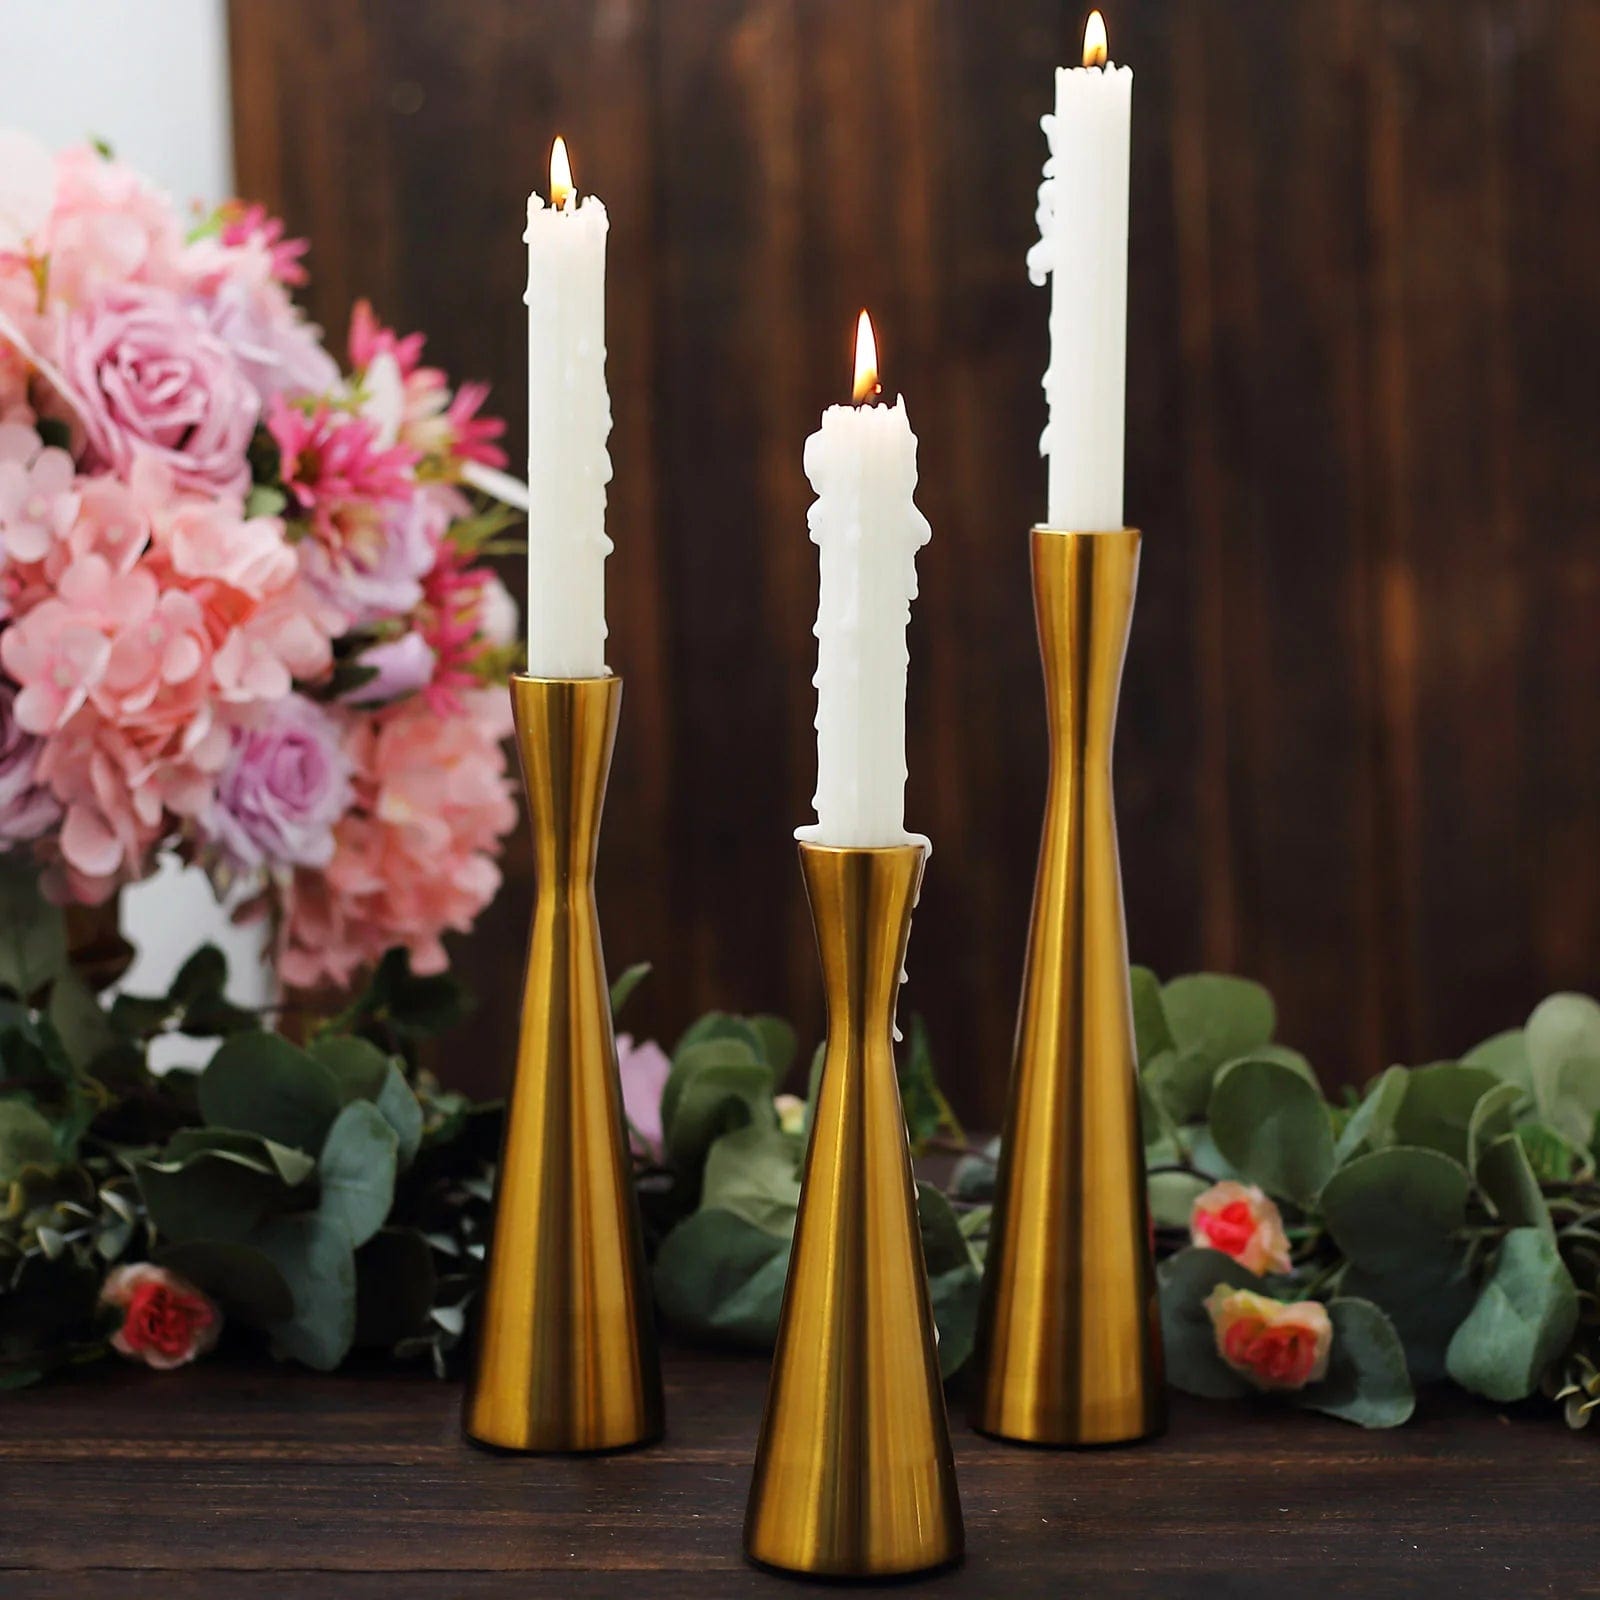 3 Gold Modern Hourglass Style Metal Taper Candle Holders